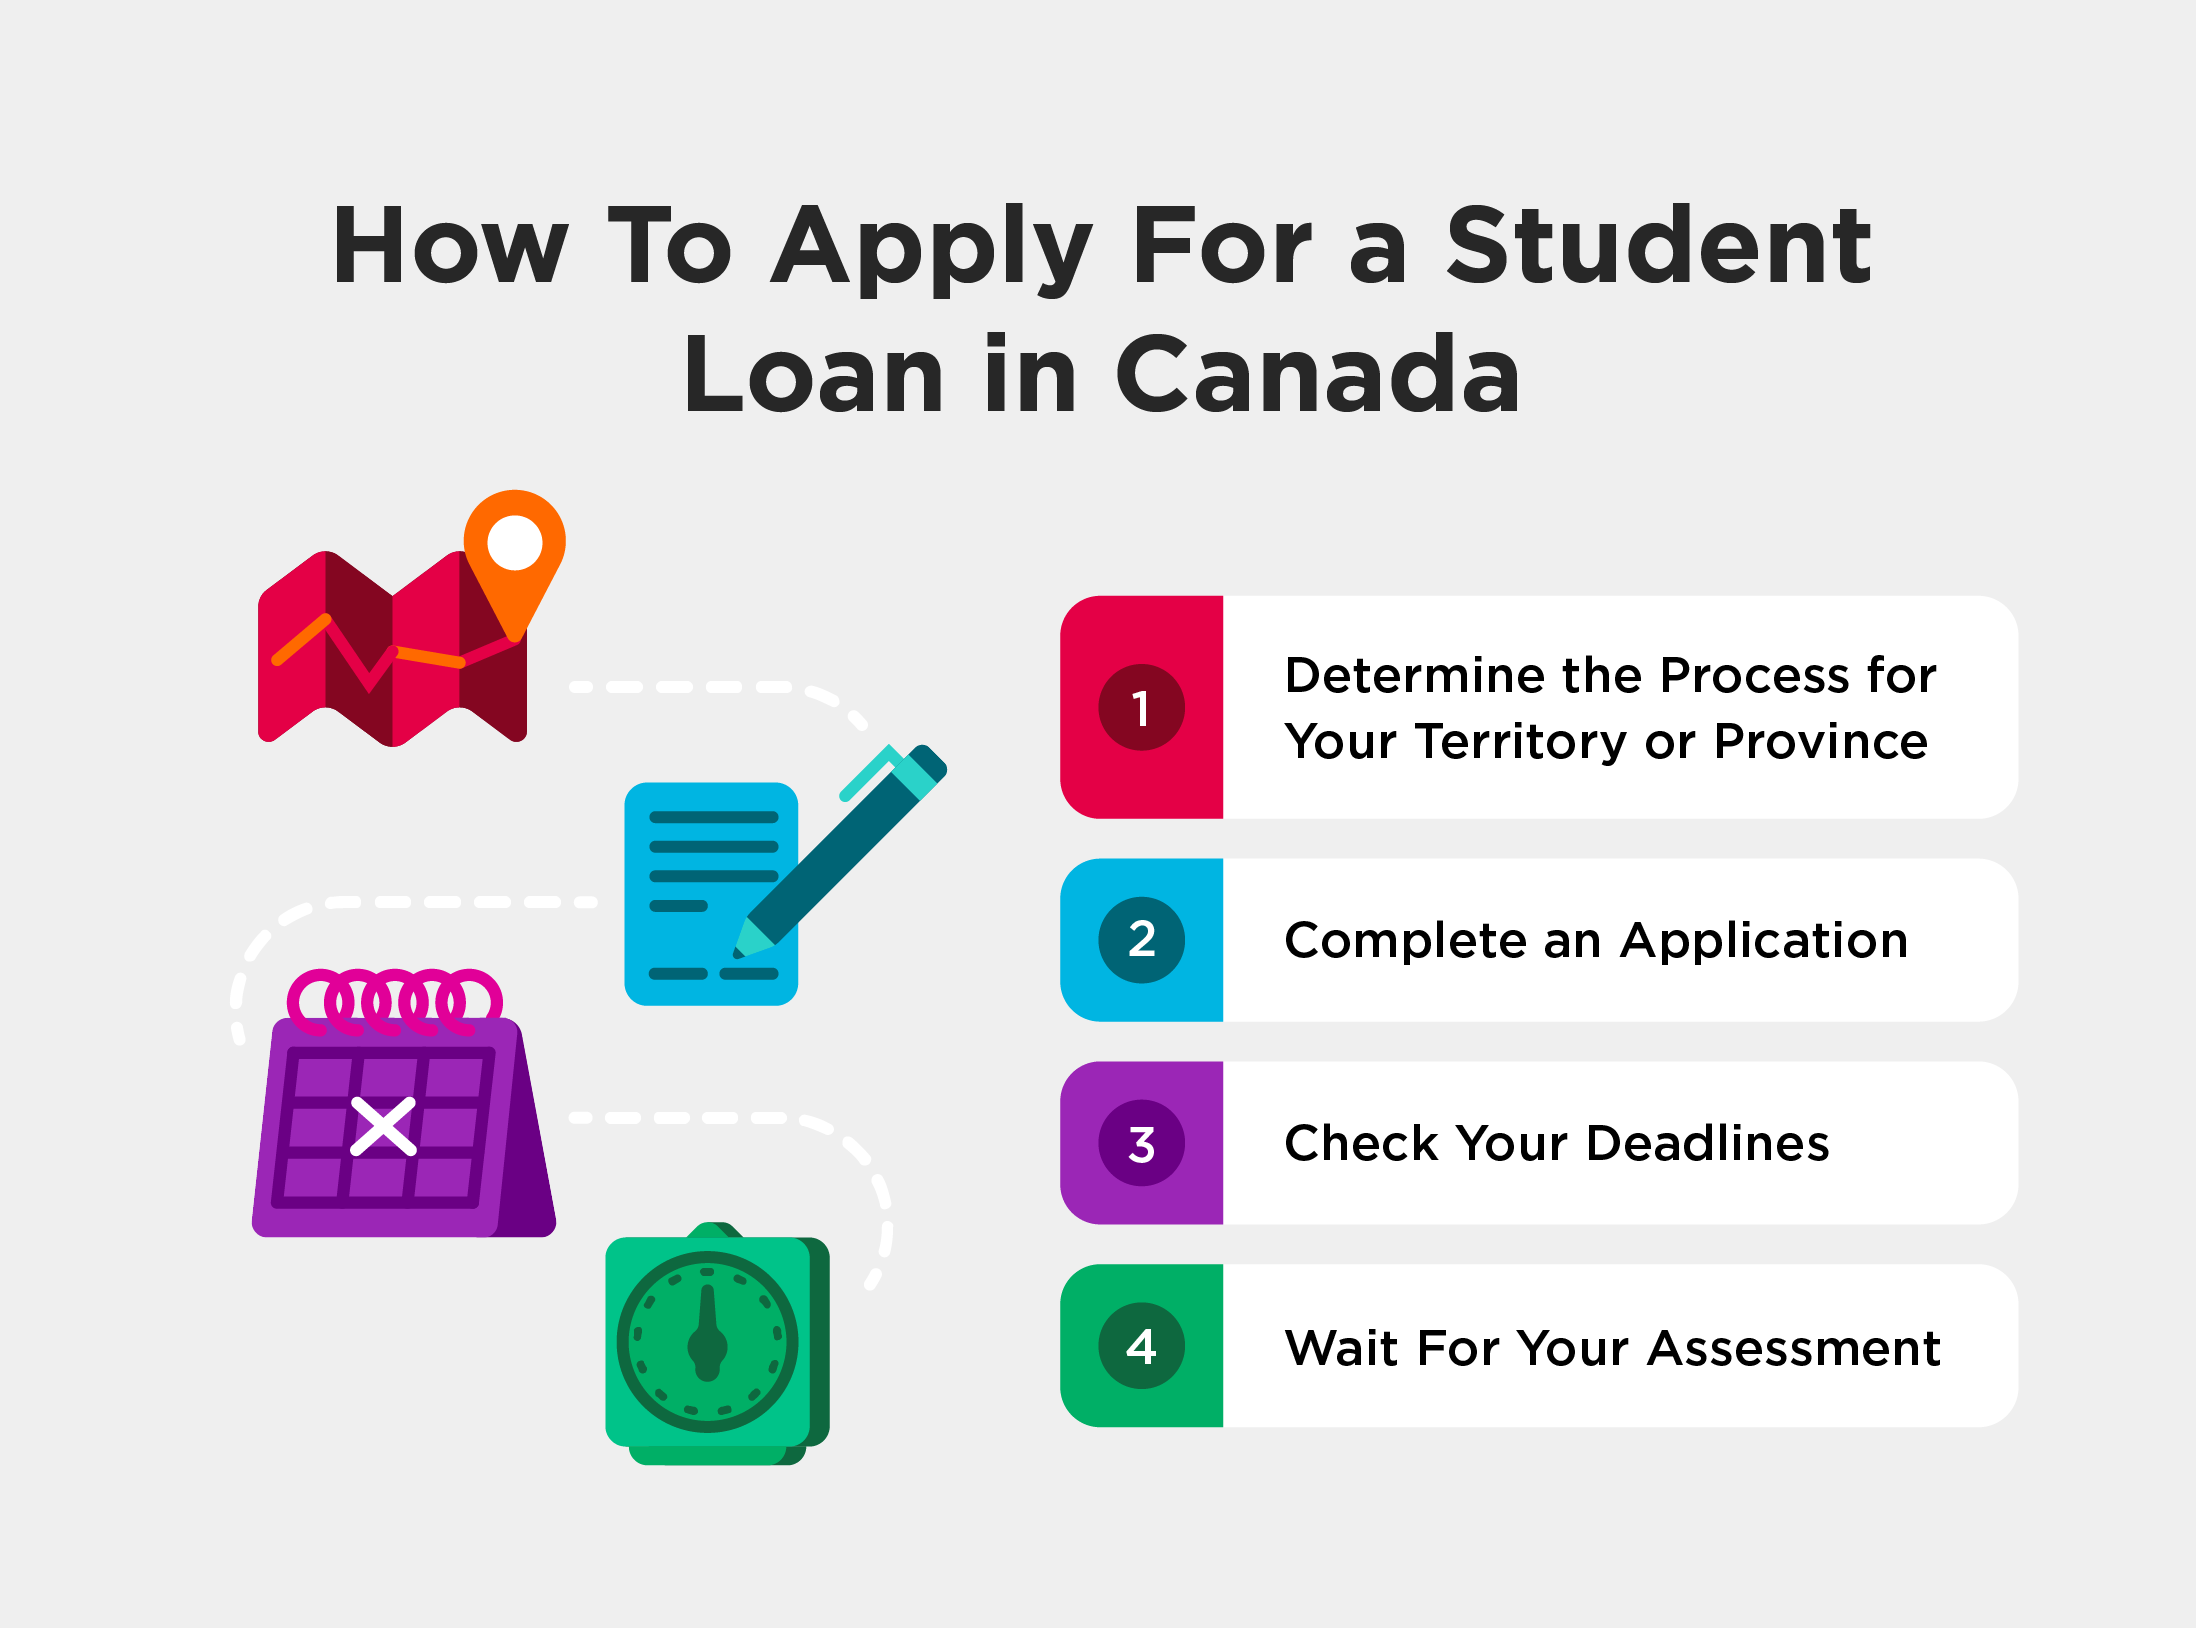 How to apply for student loans in Canada 